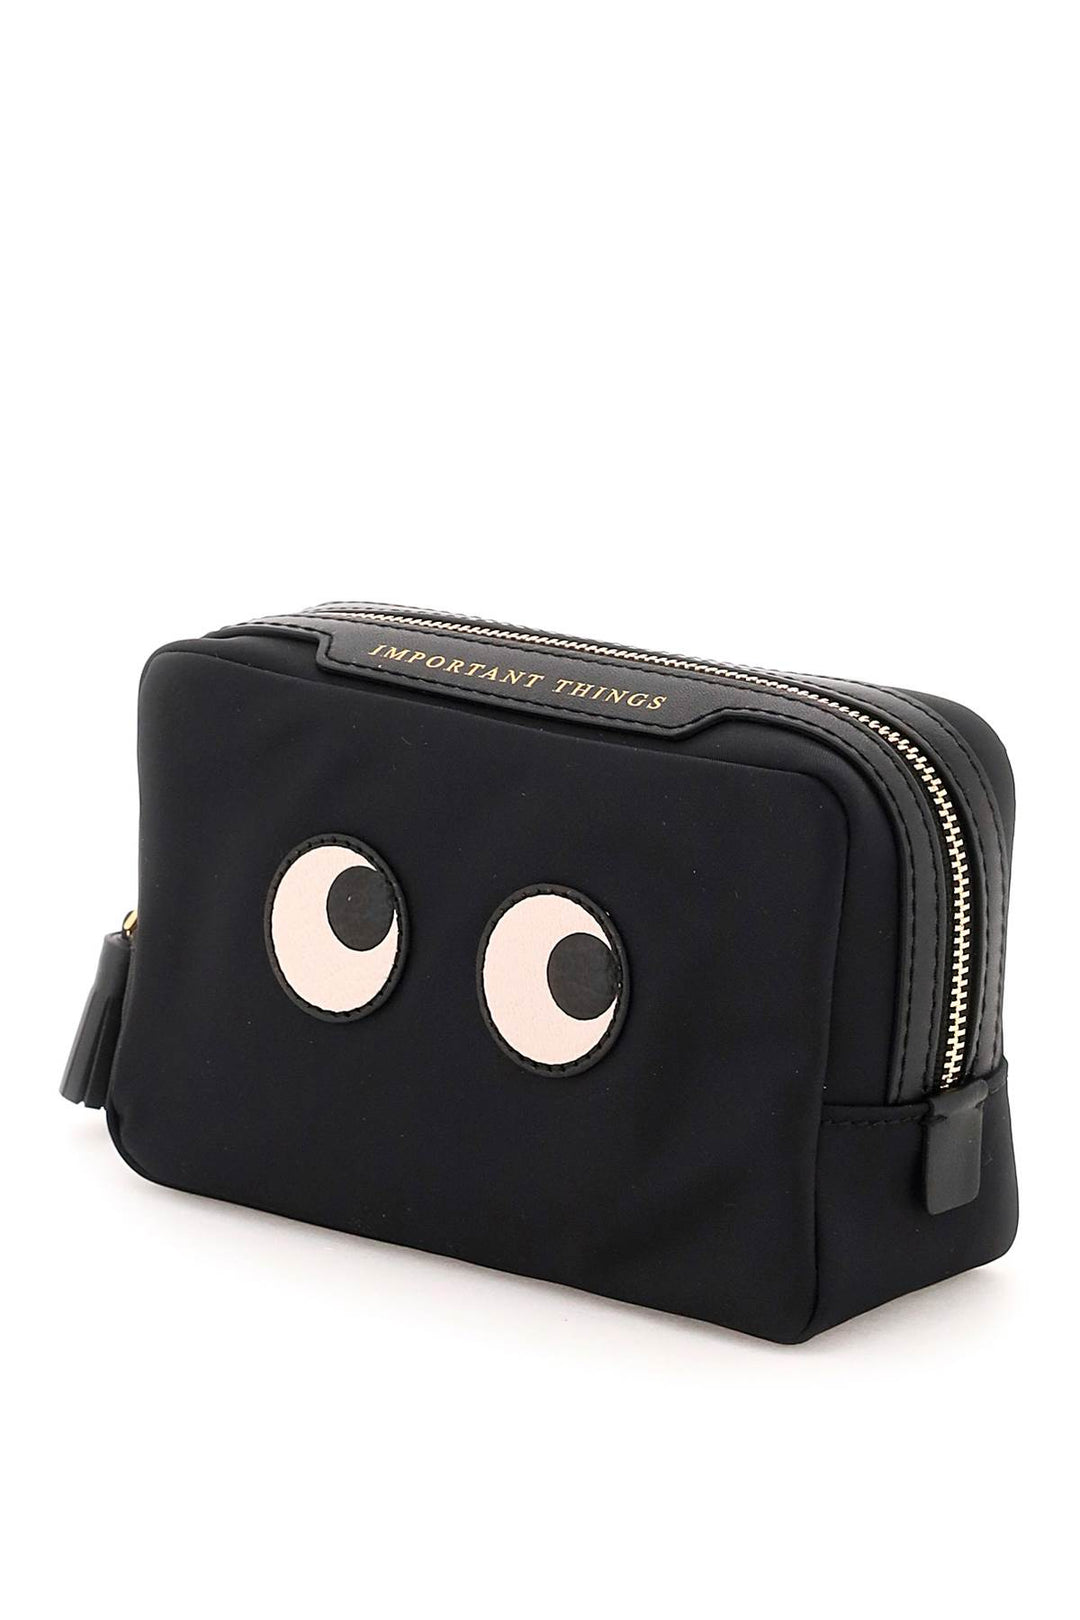 Pouch 'Important Things Eyes' - Anya Hindmarch - CLT